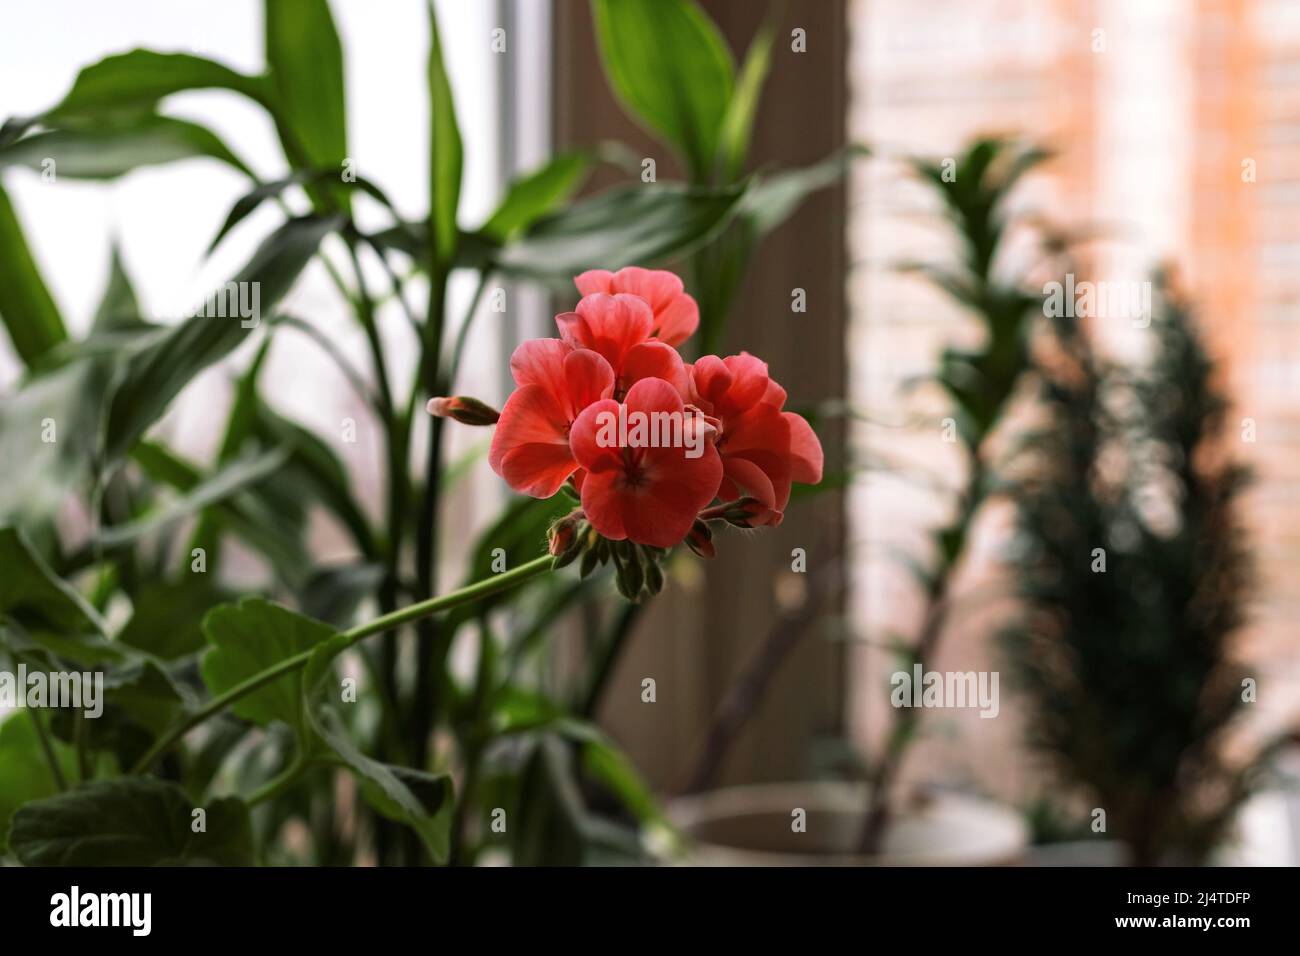 Pink red geranium pelargonium flower potted house plant blooming on window sill on city background Stock Photo